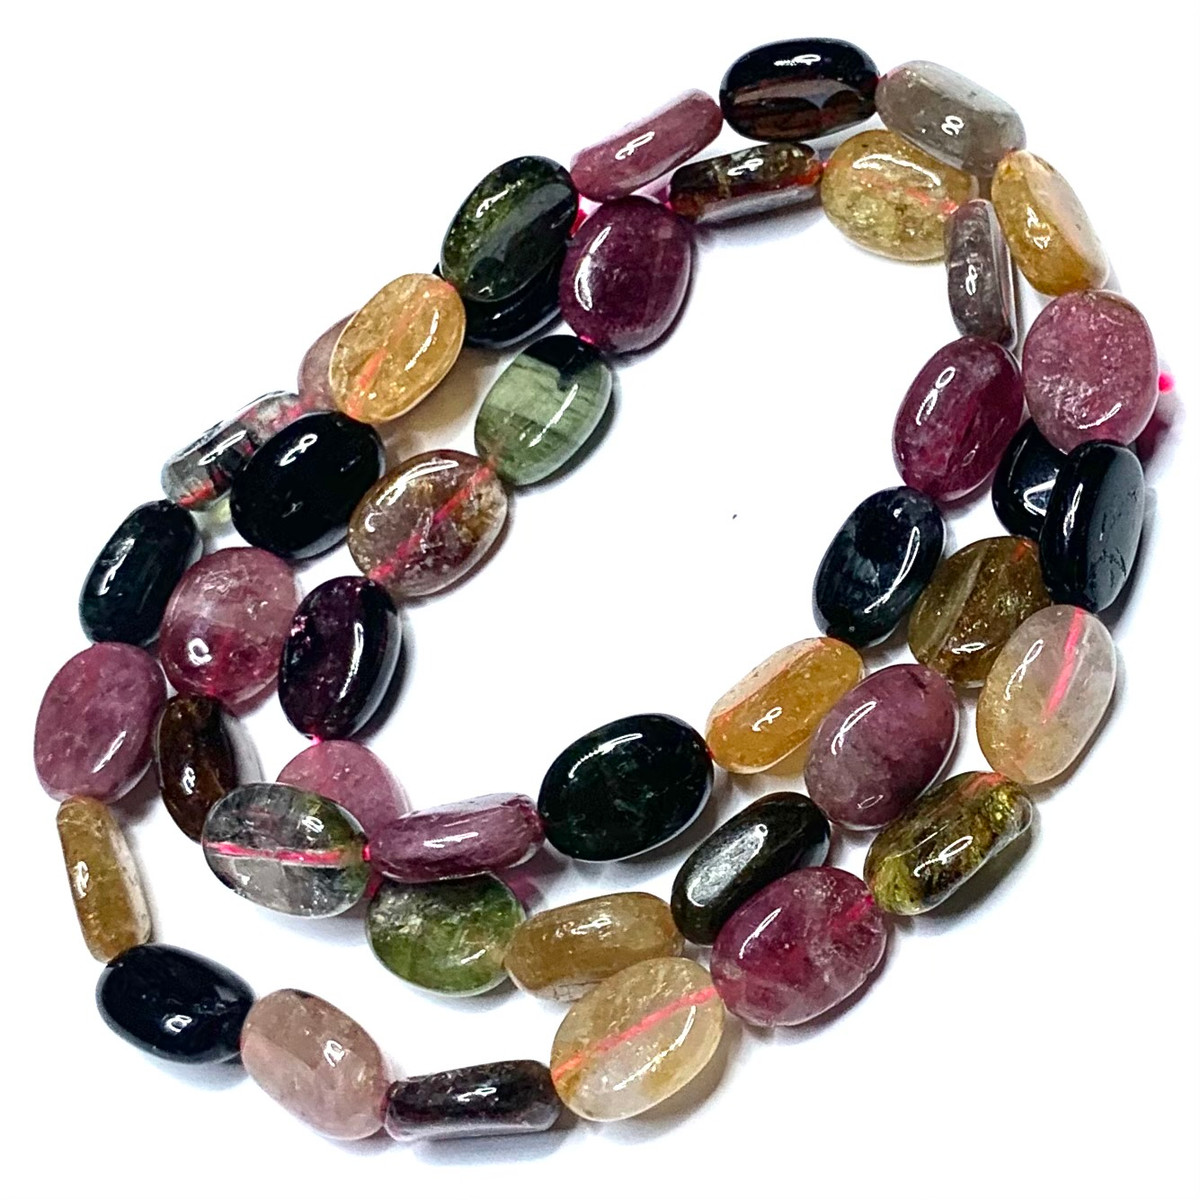 Tourmaline Tumbled and Polished Nugget Beads-8 x 6mm (SP3710